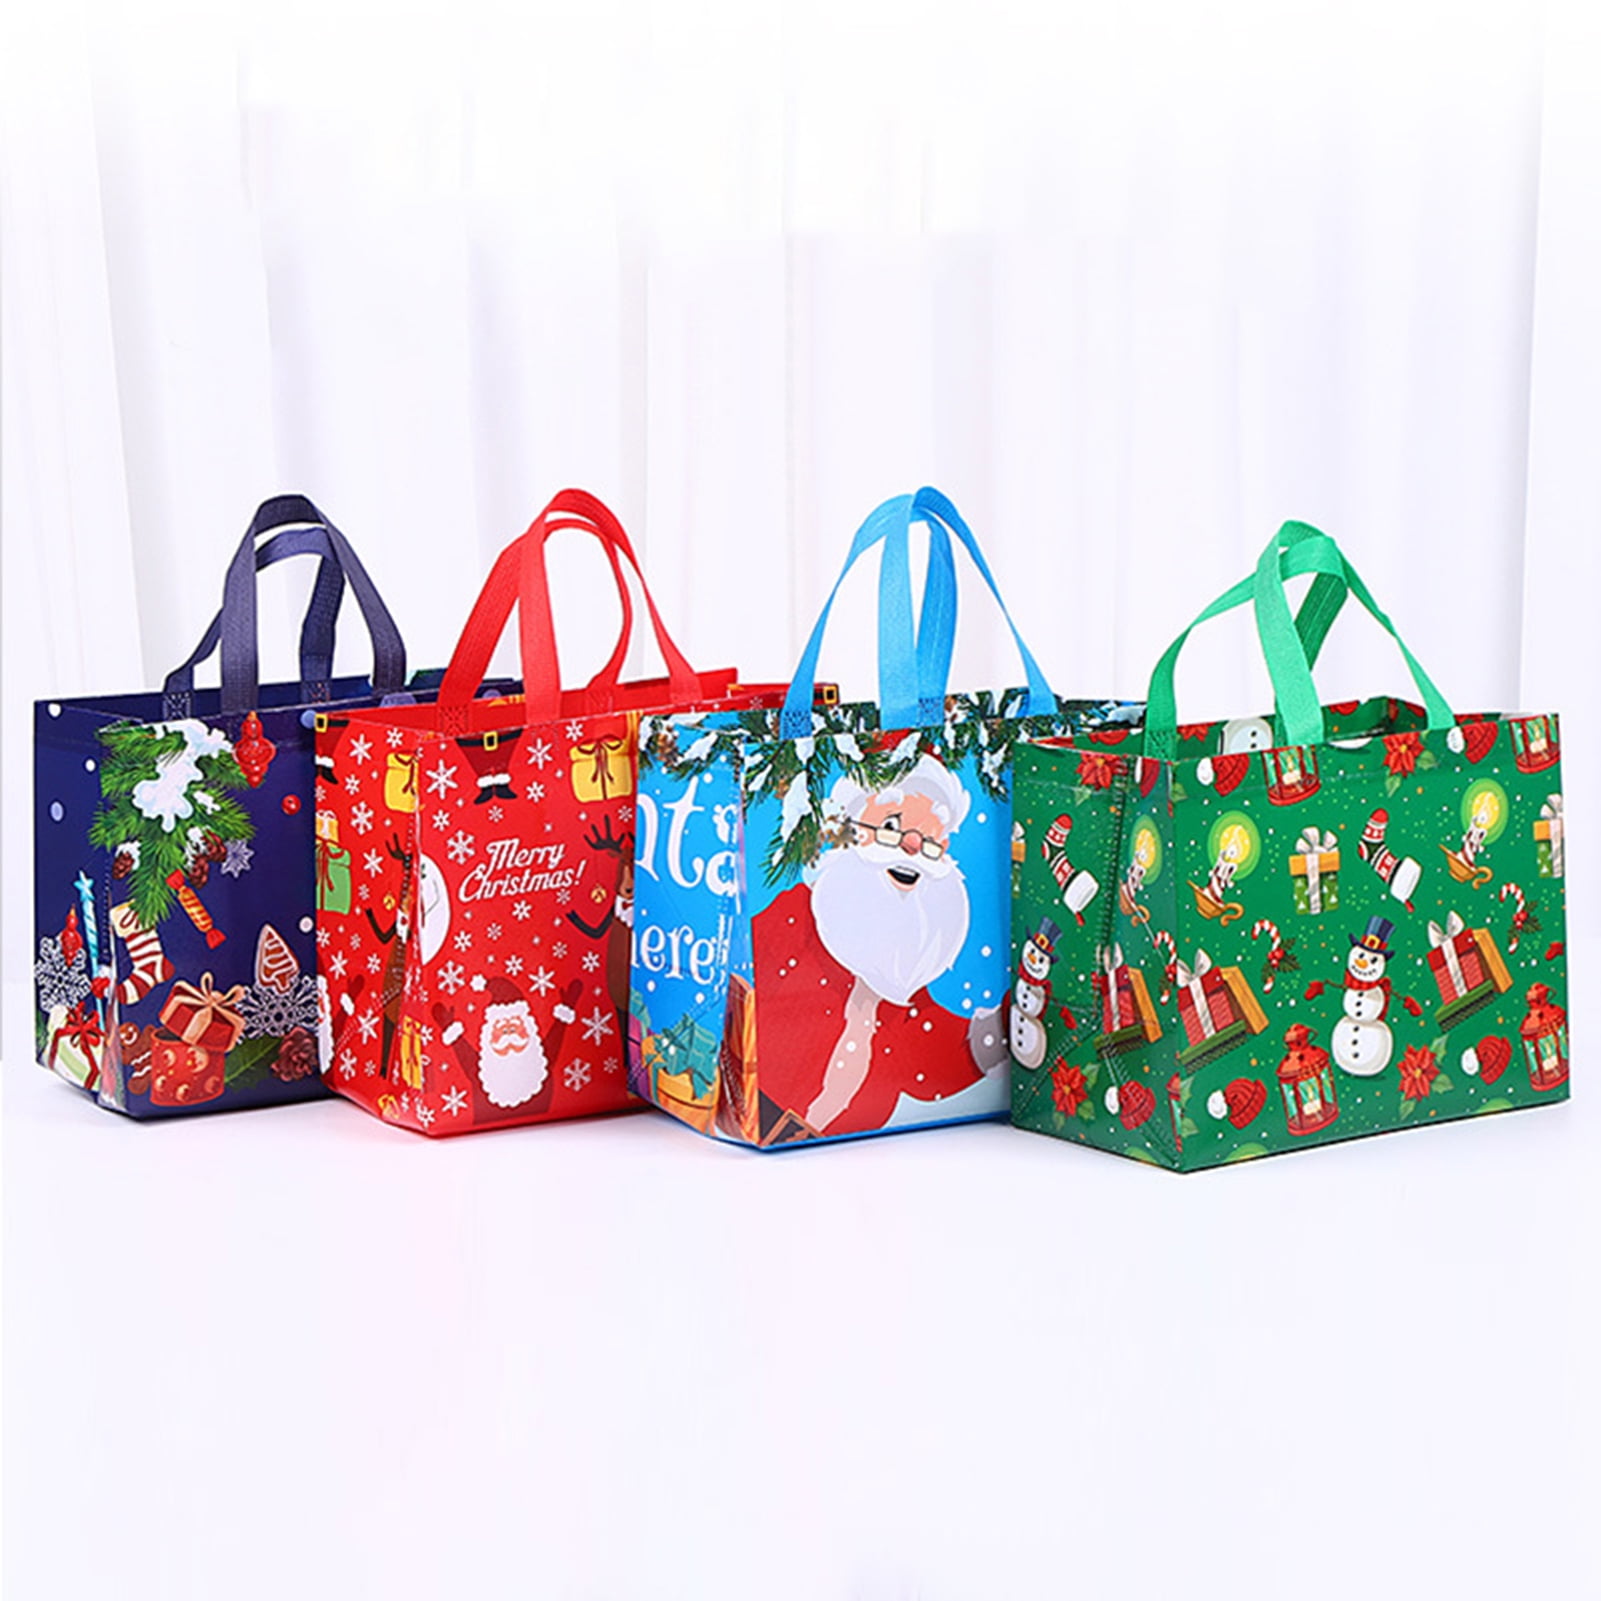 Sweetude 100 Pack Christmas Gift Bags Reusable Tote with Handle X-Small